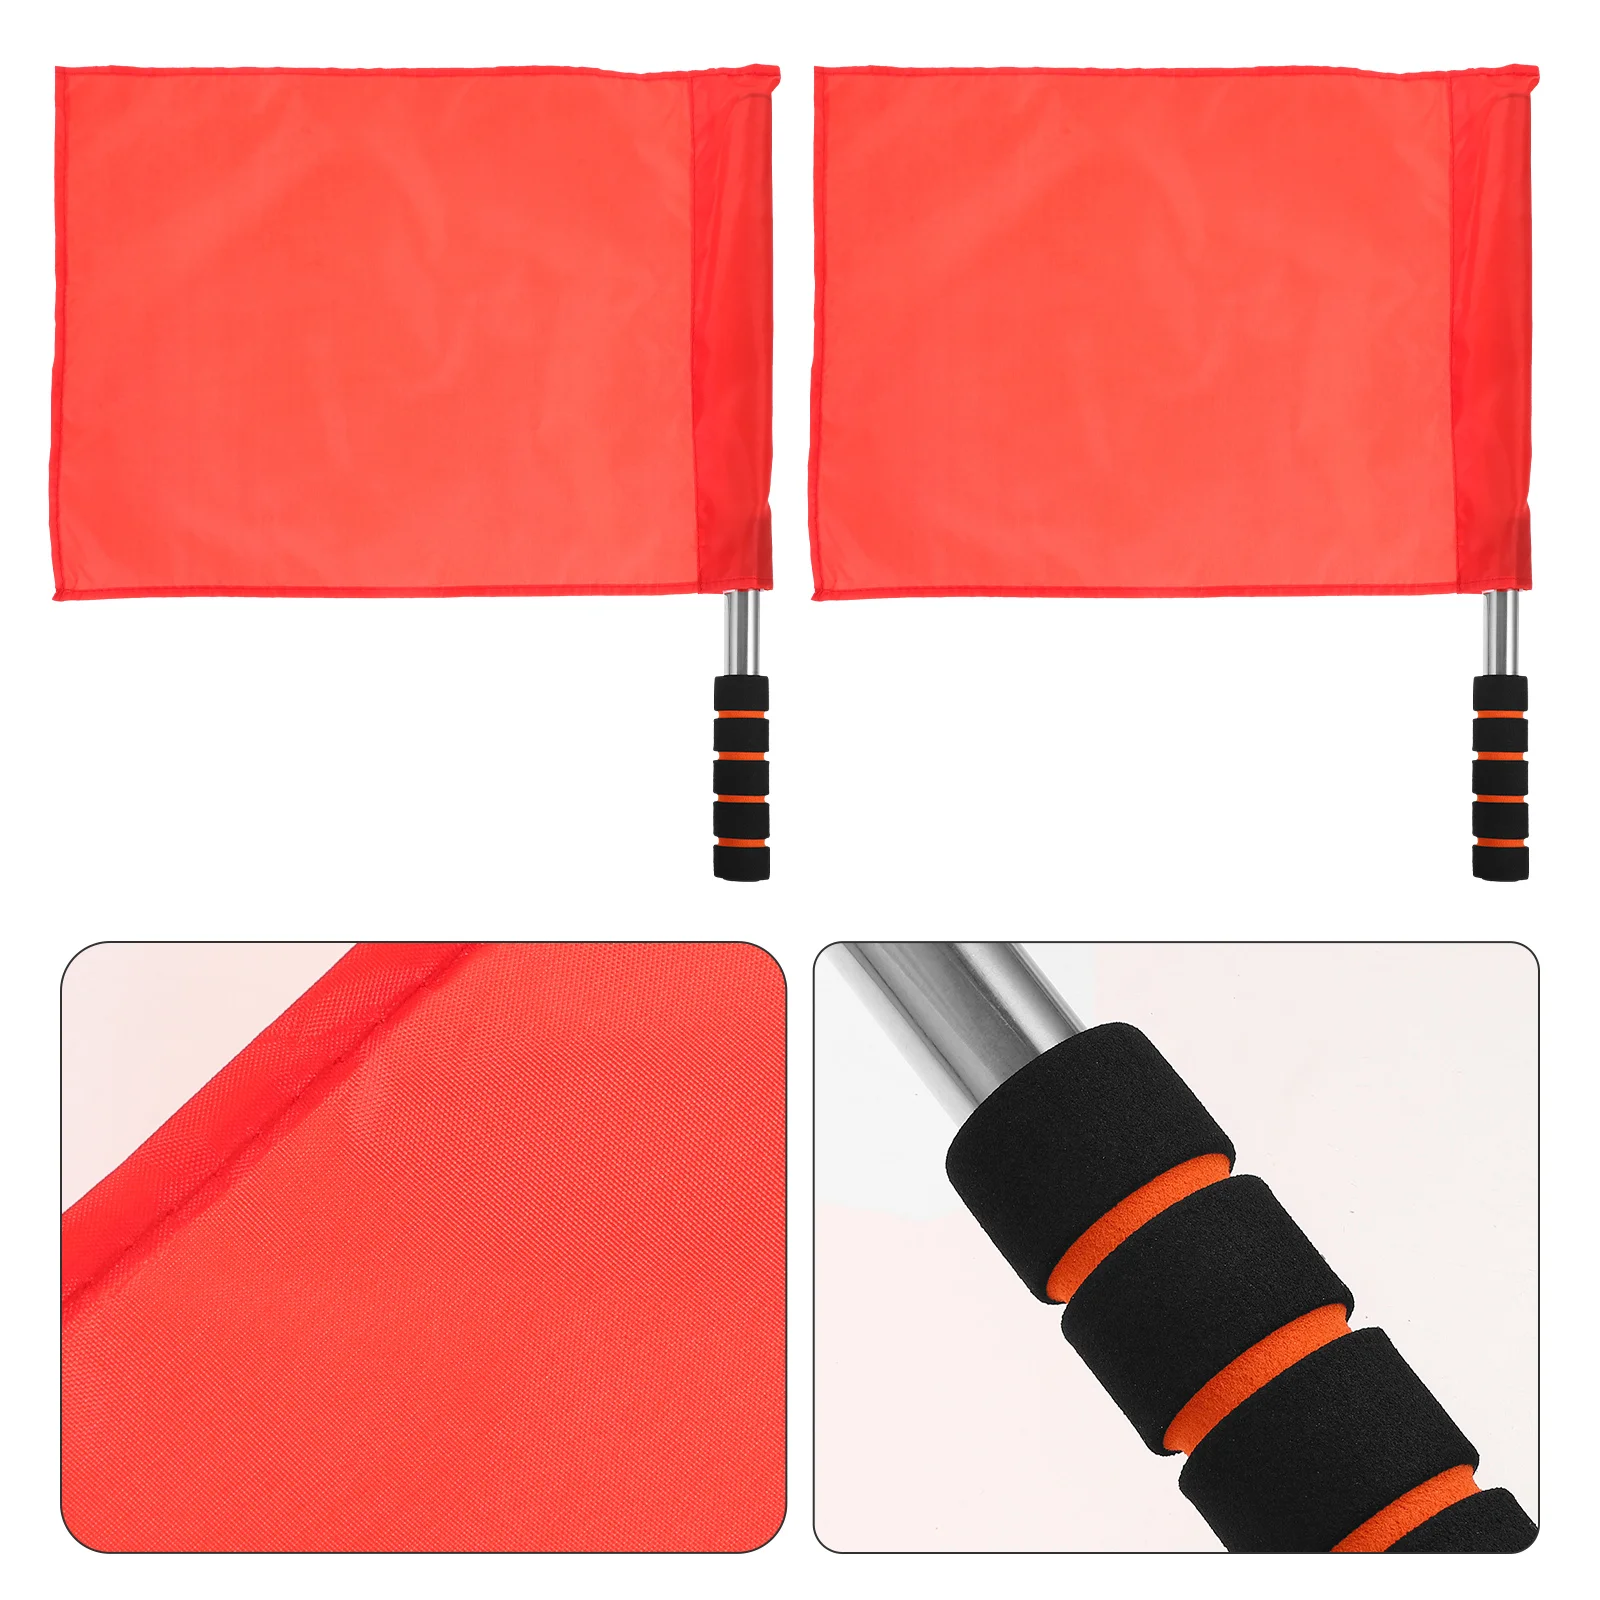 

Events Referee Red Hand Referee Flag Bags Match Stainless Steel Pole Red Hand Referee Flag Bags Hand Signal Red Hand Referee